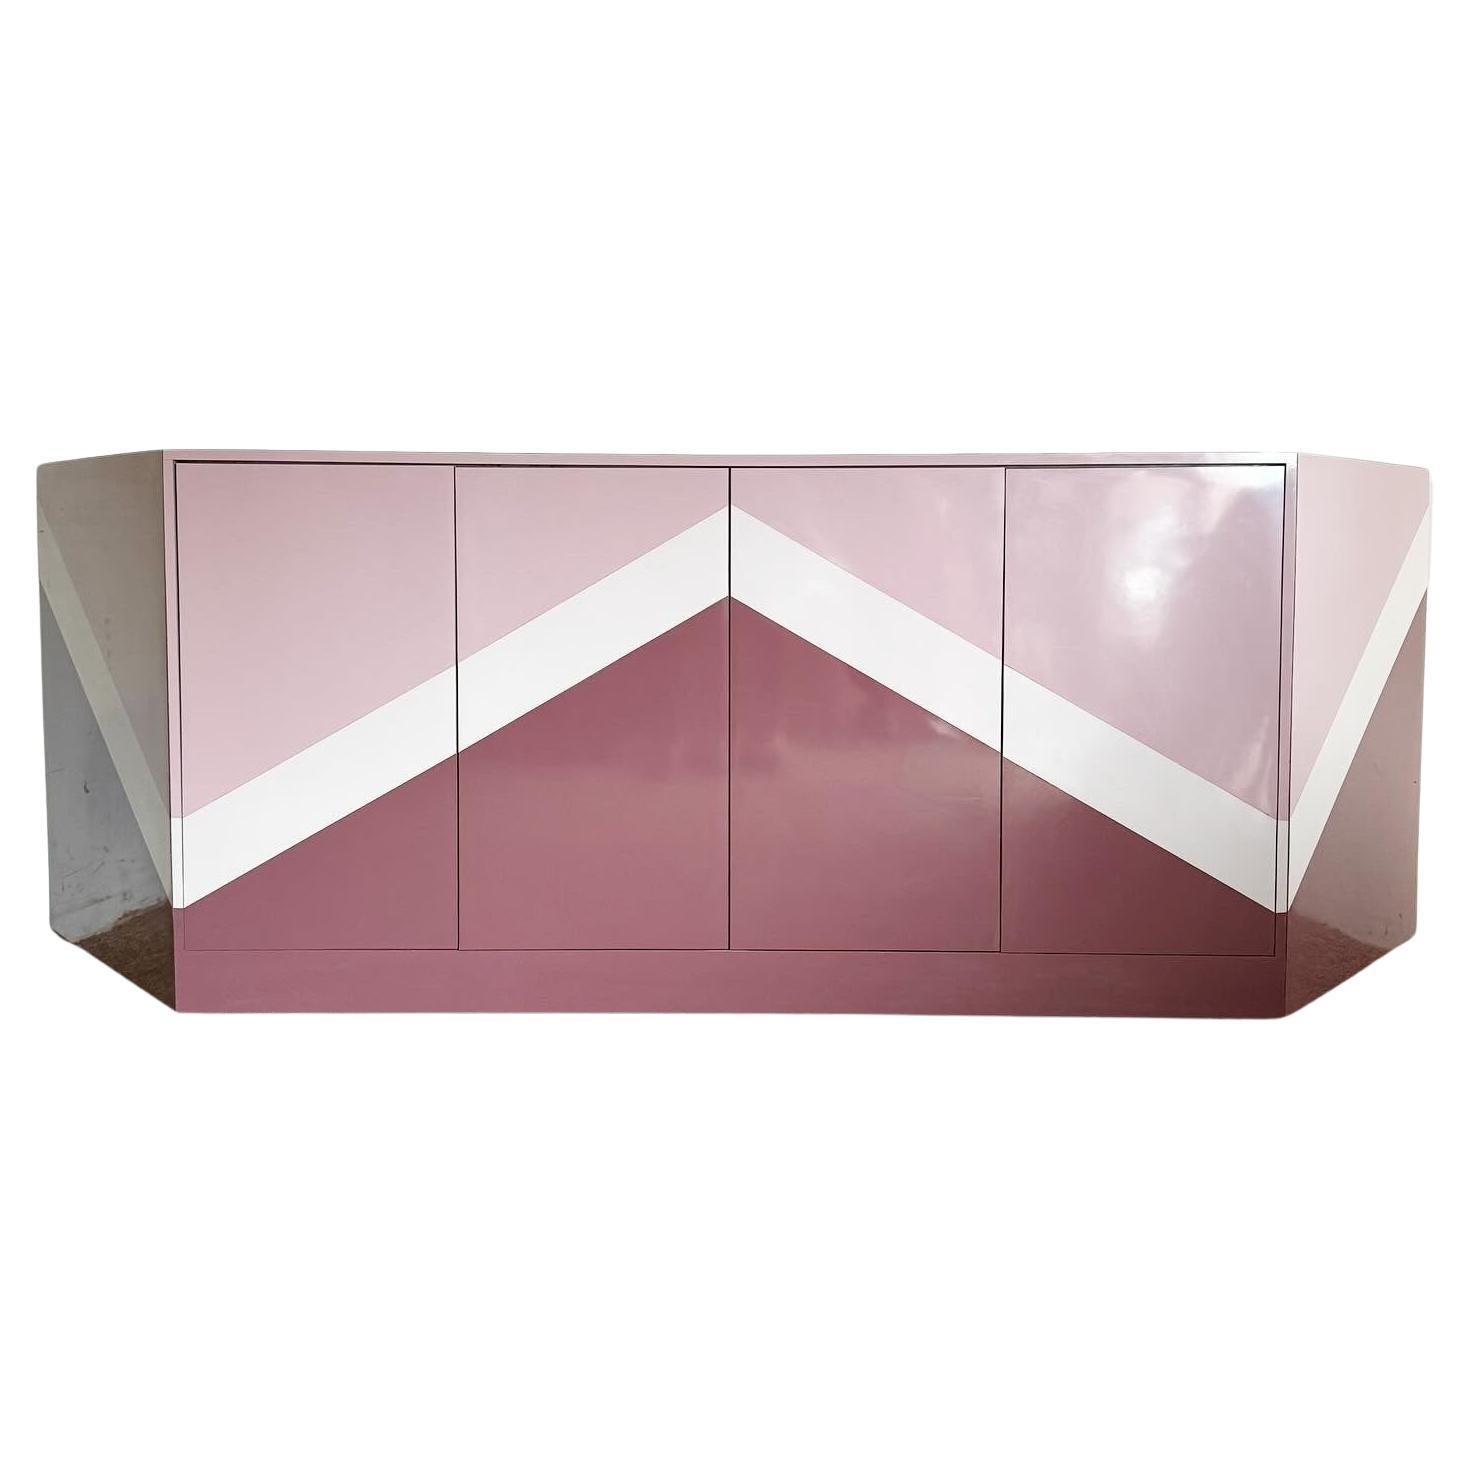 Postmodern Purple Pink and Mauve Lacquer Laminate Credenza